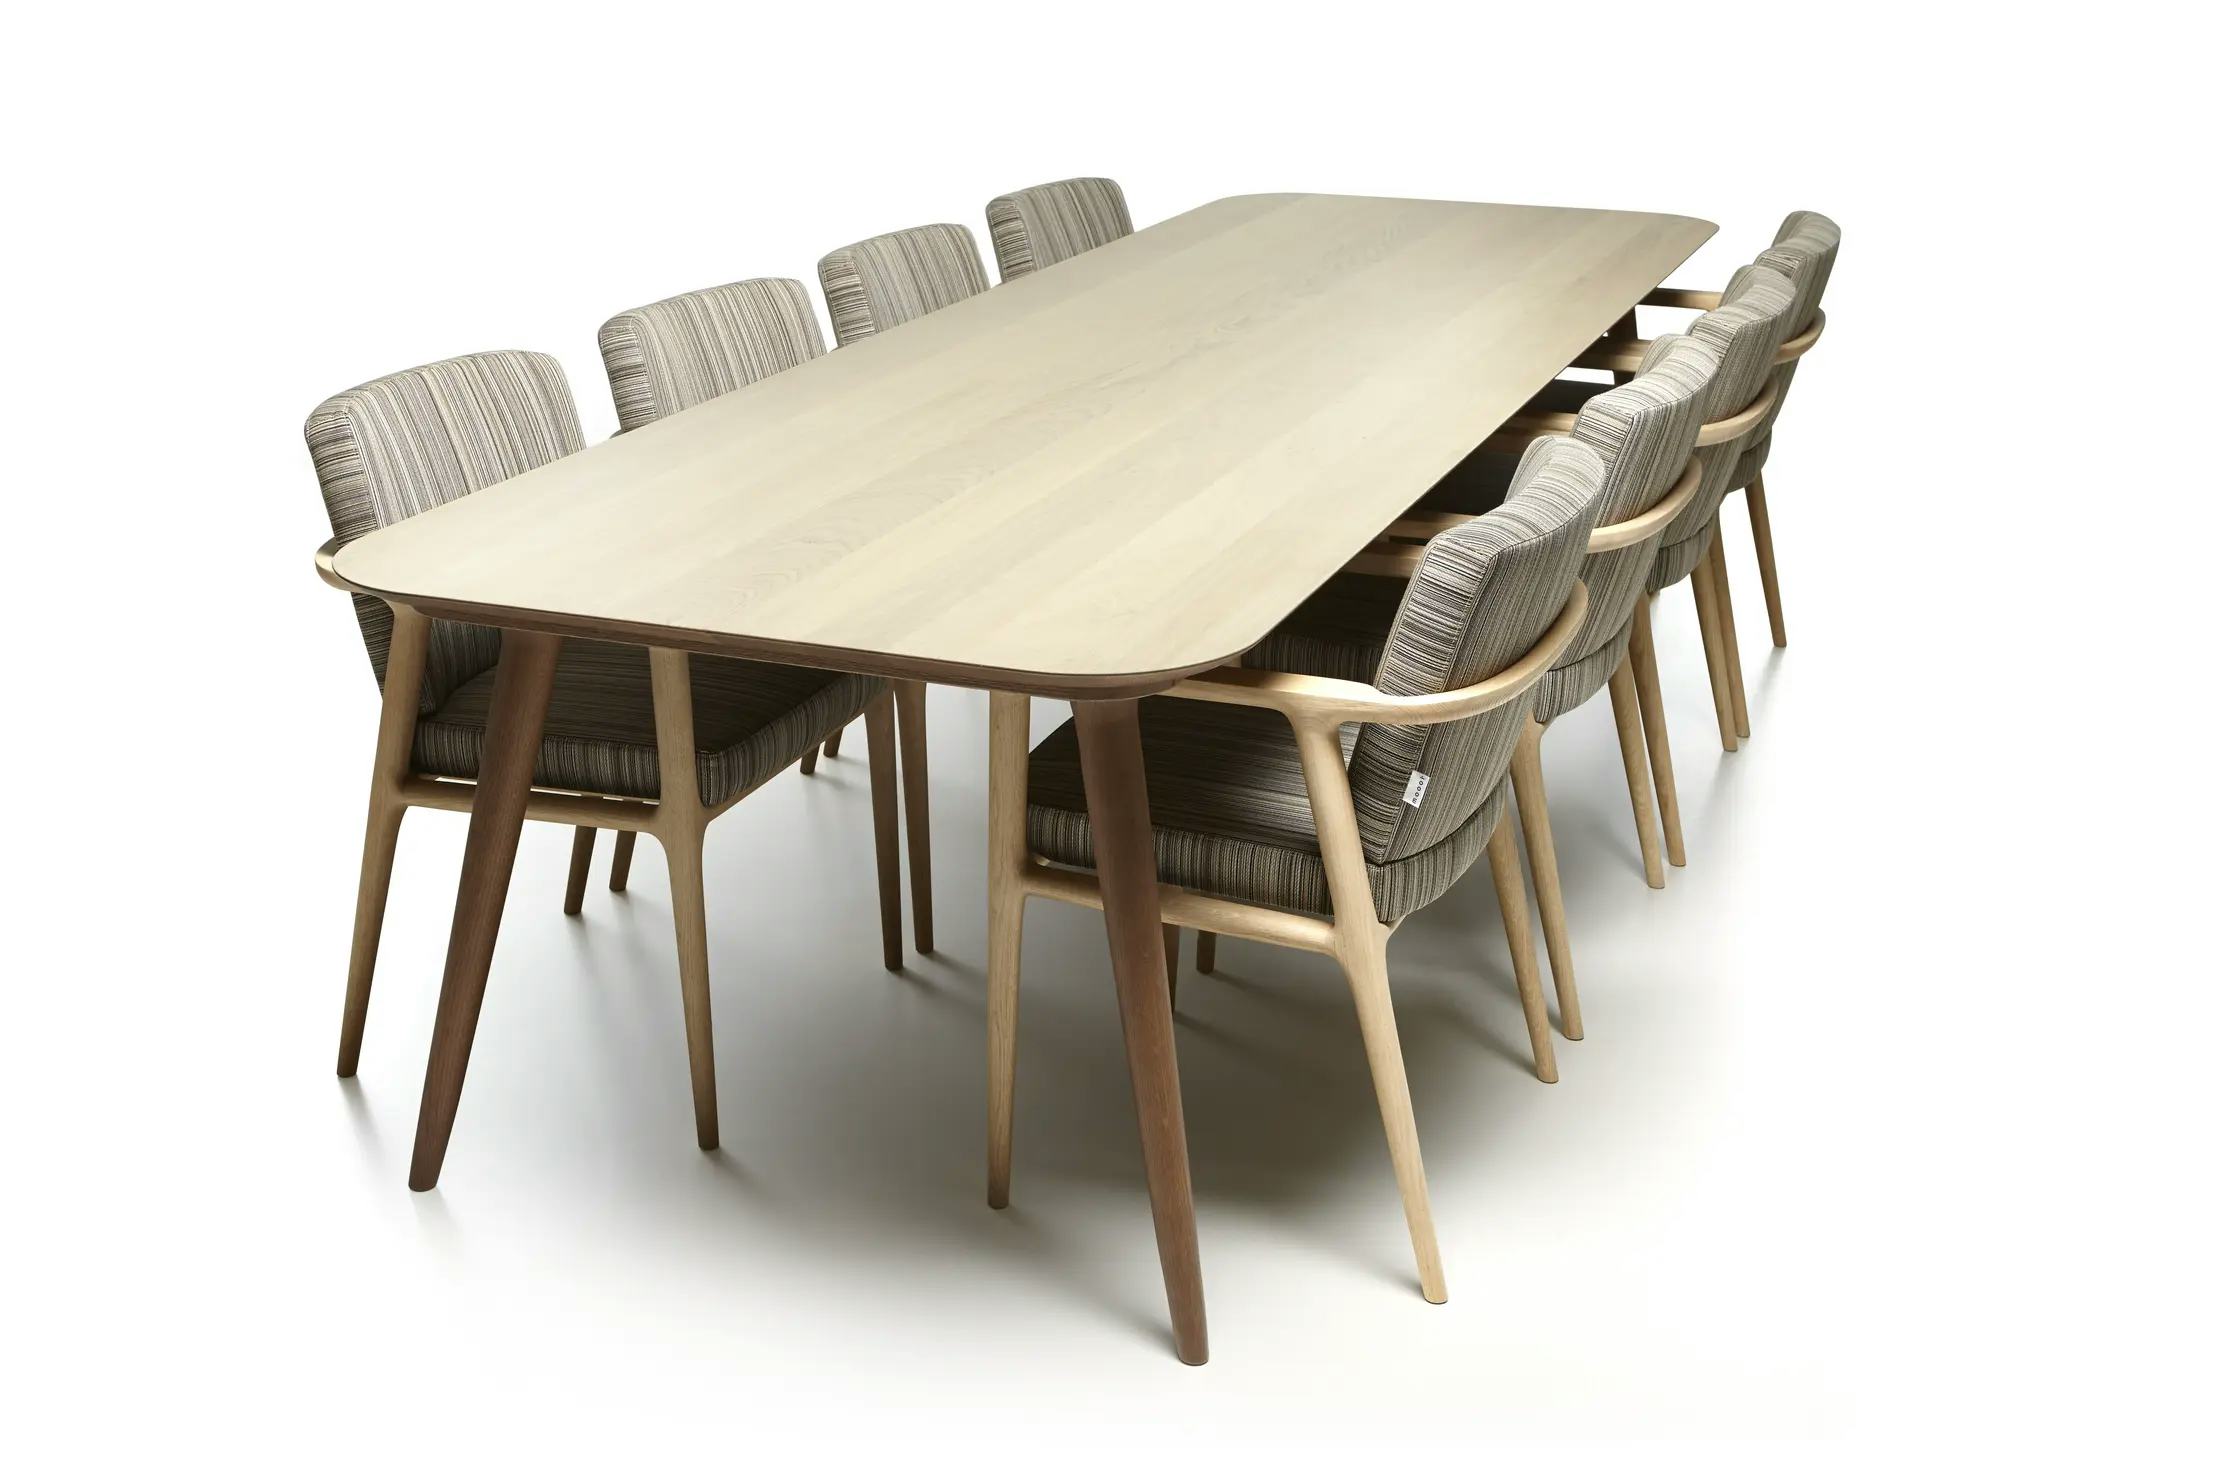 Zio Dining Table with Zio Dining Chairs